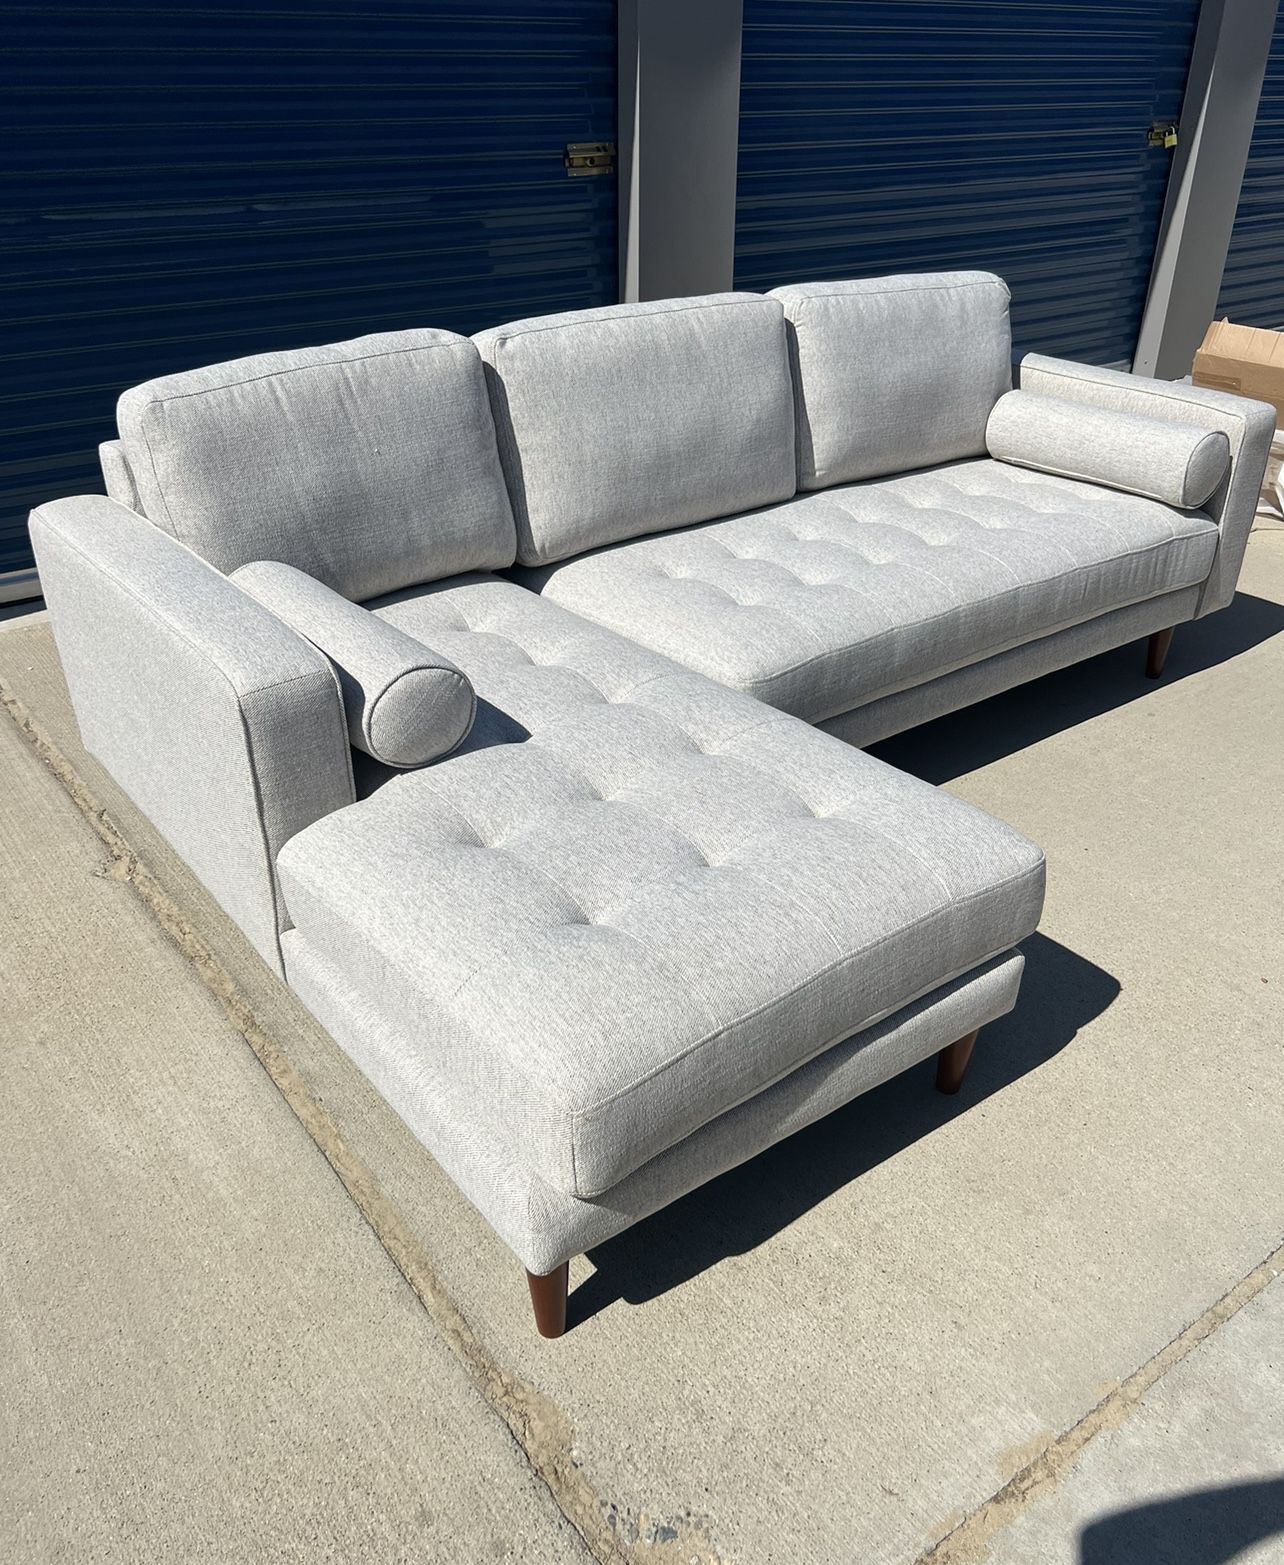 Brand New. Mid Century Modern Tufted Sofa Sectional. Retails Over $2300